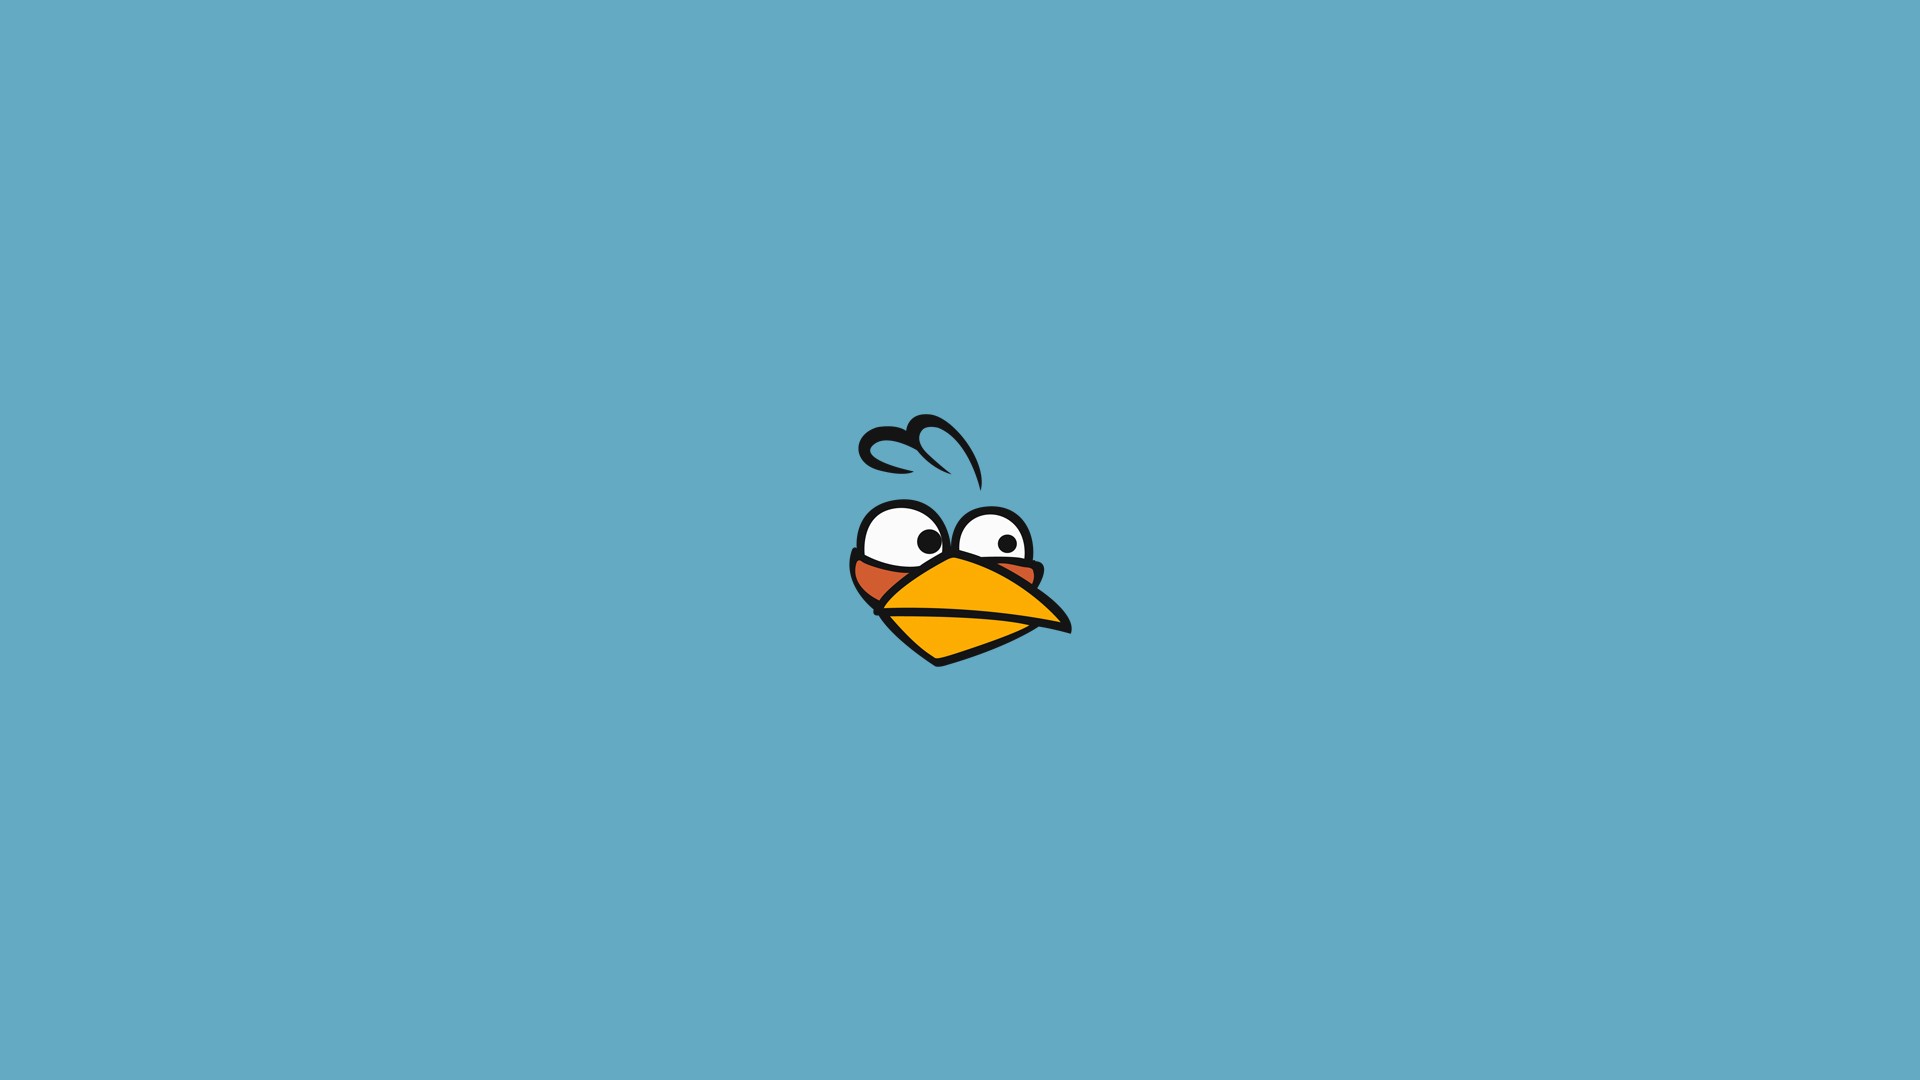 angry birds live wallpaper,angry birds,blue,cartoon,logo,operating system